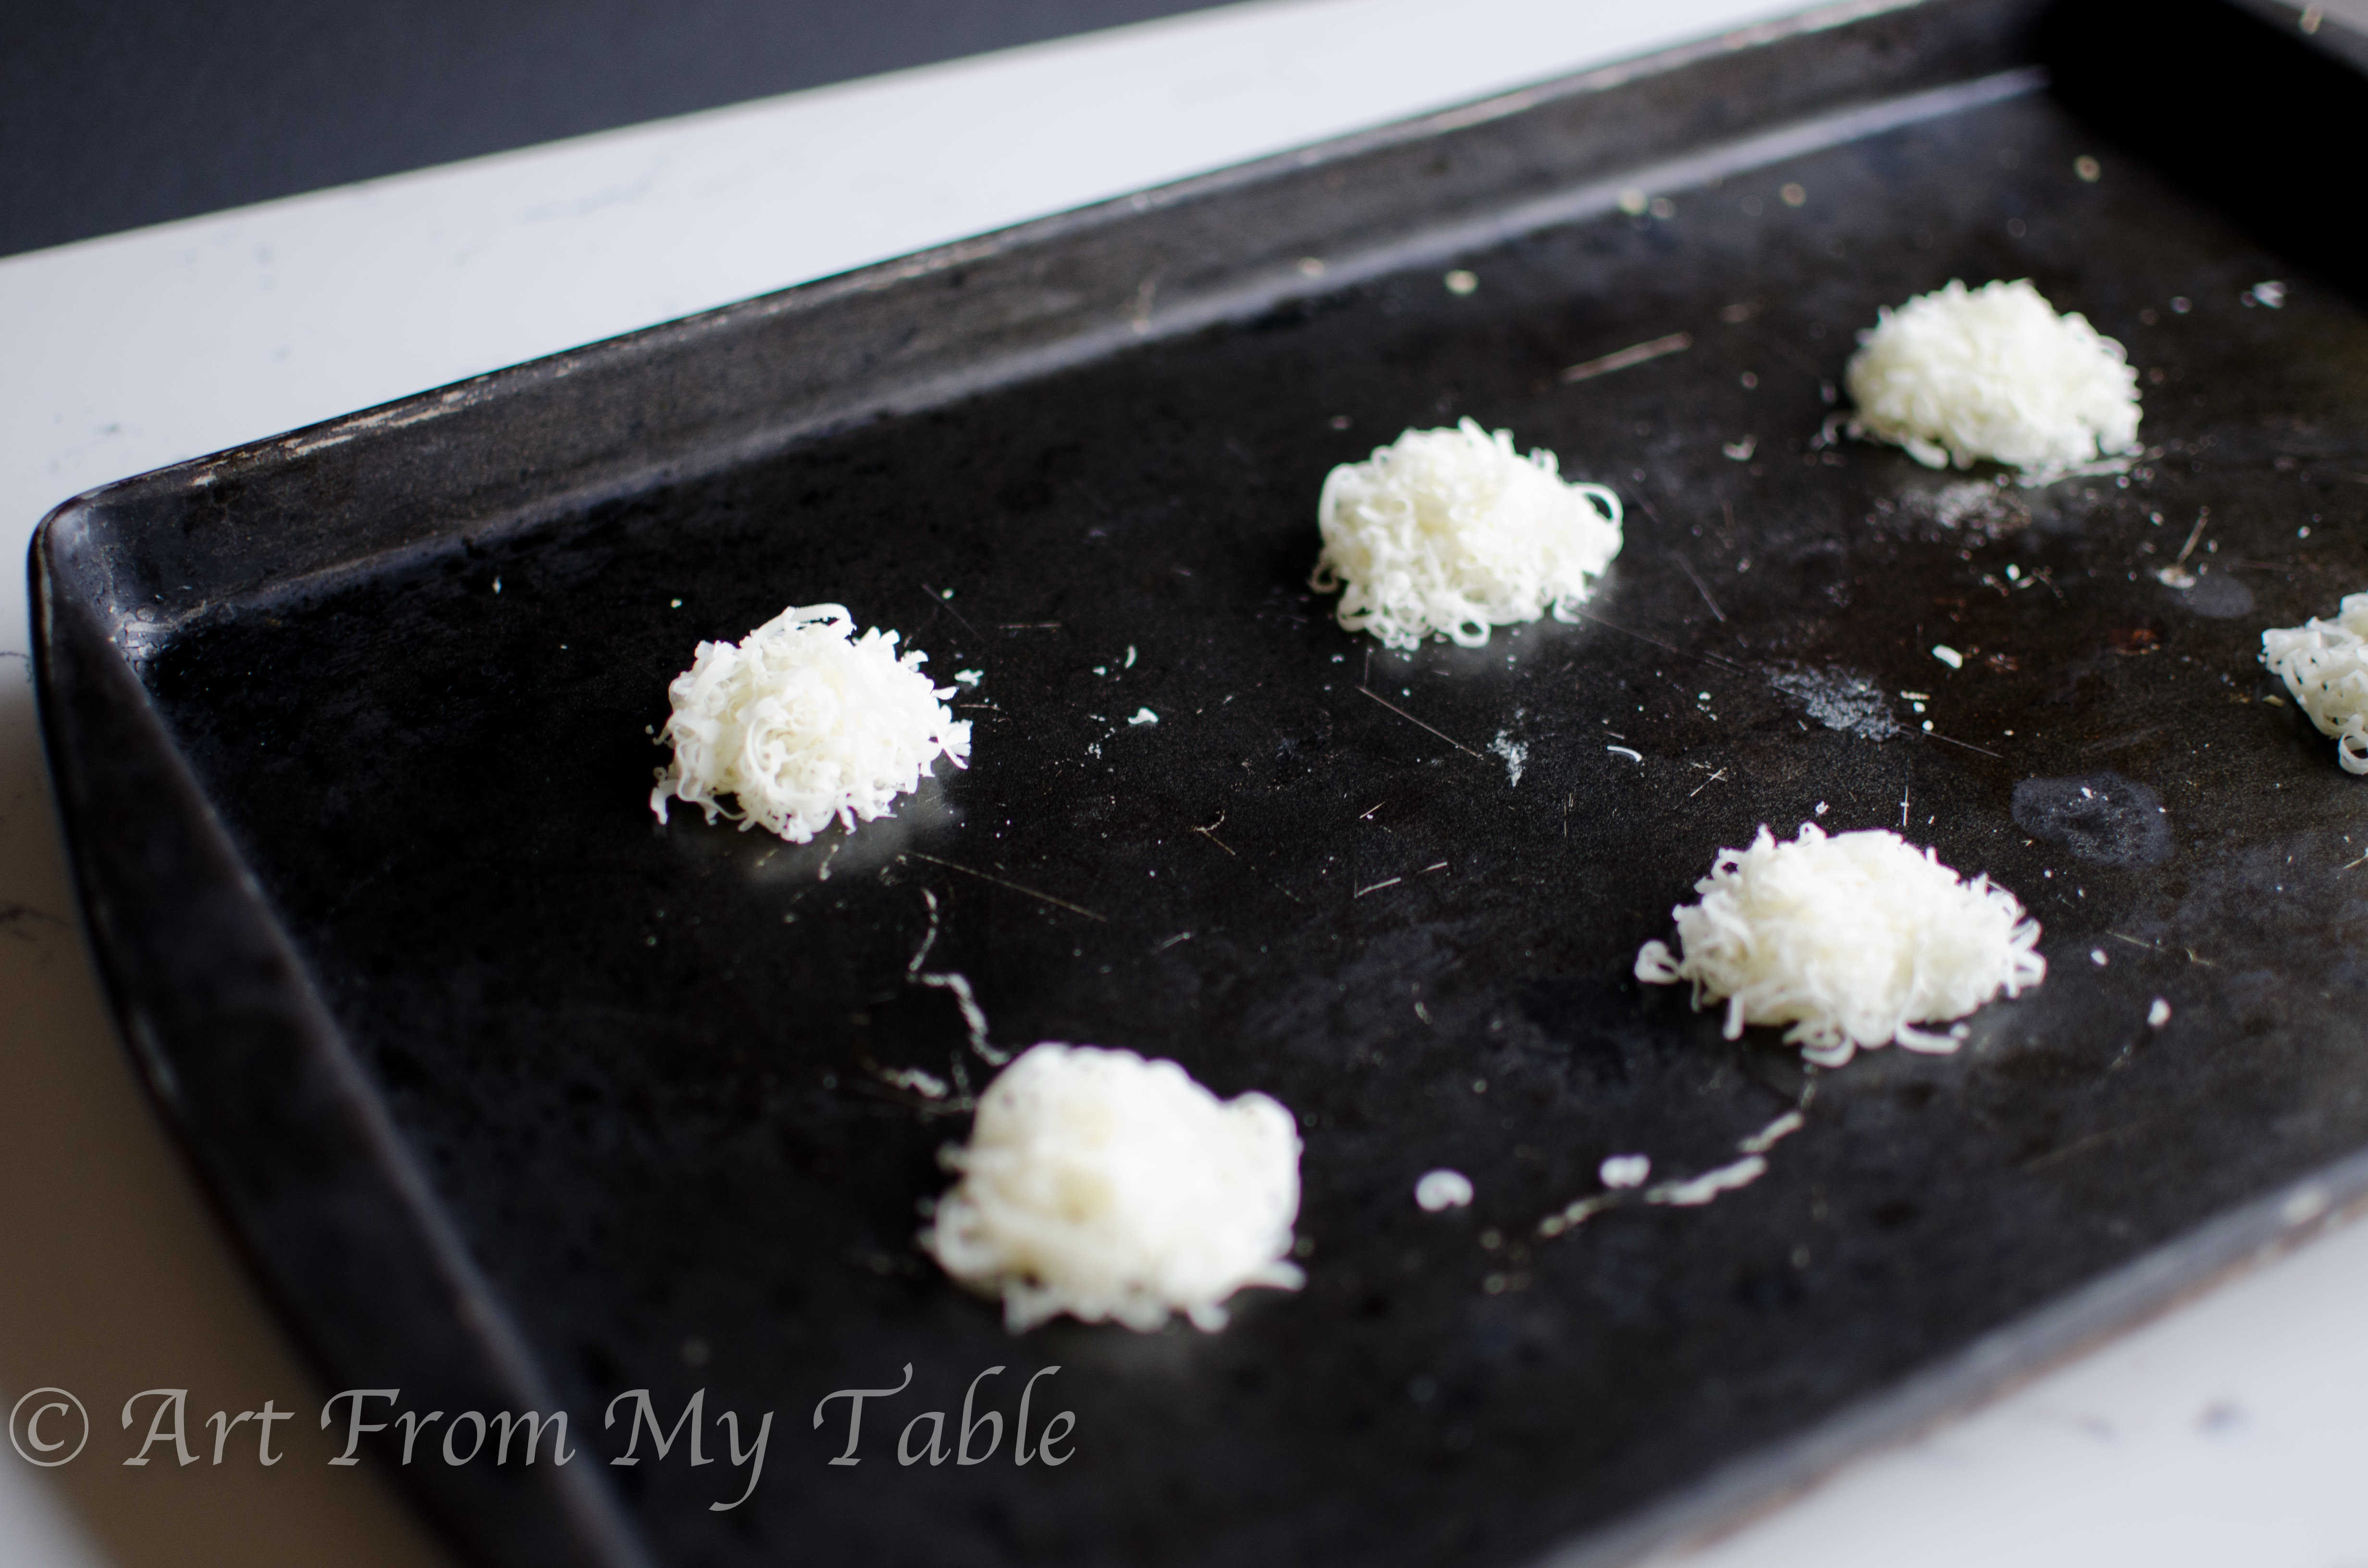 Rimmed baking sheet with shredded Parmesan cheese formed into circles.